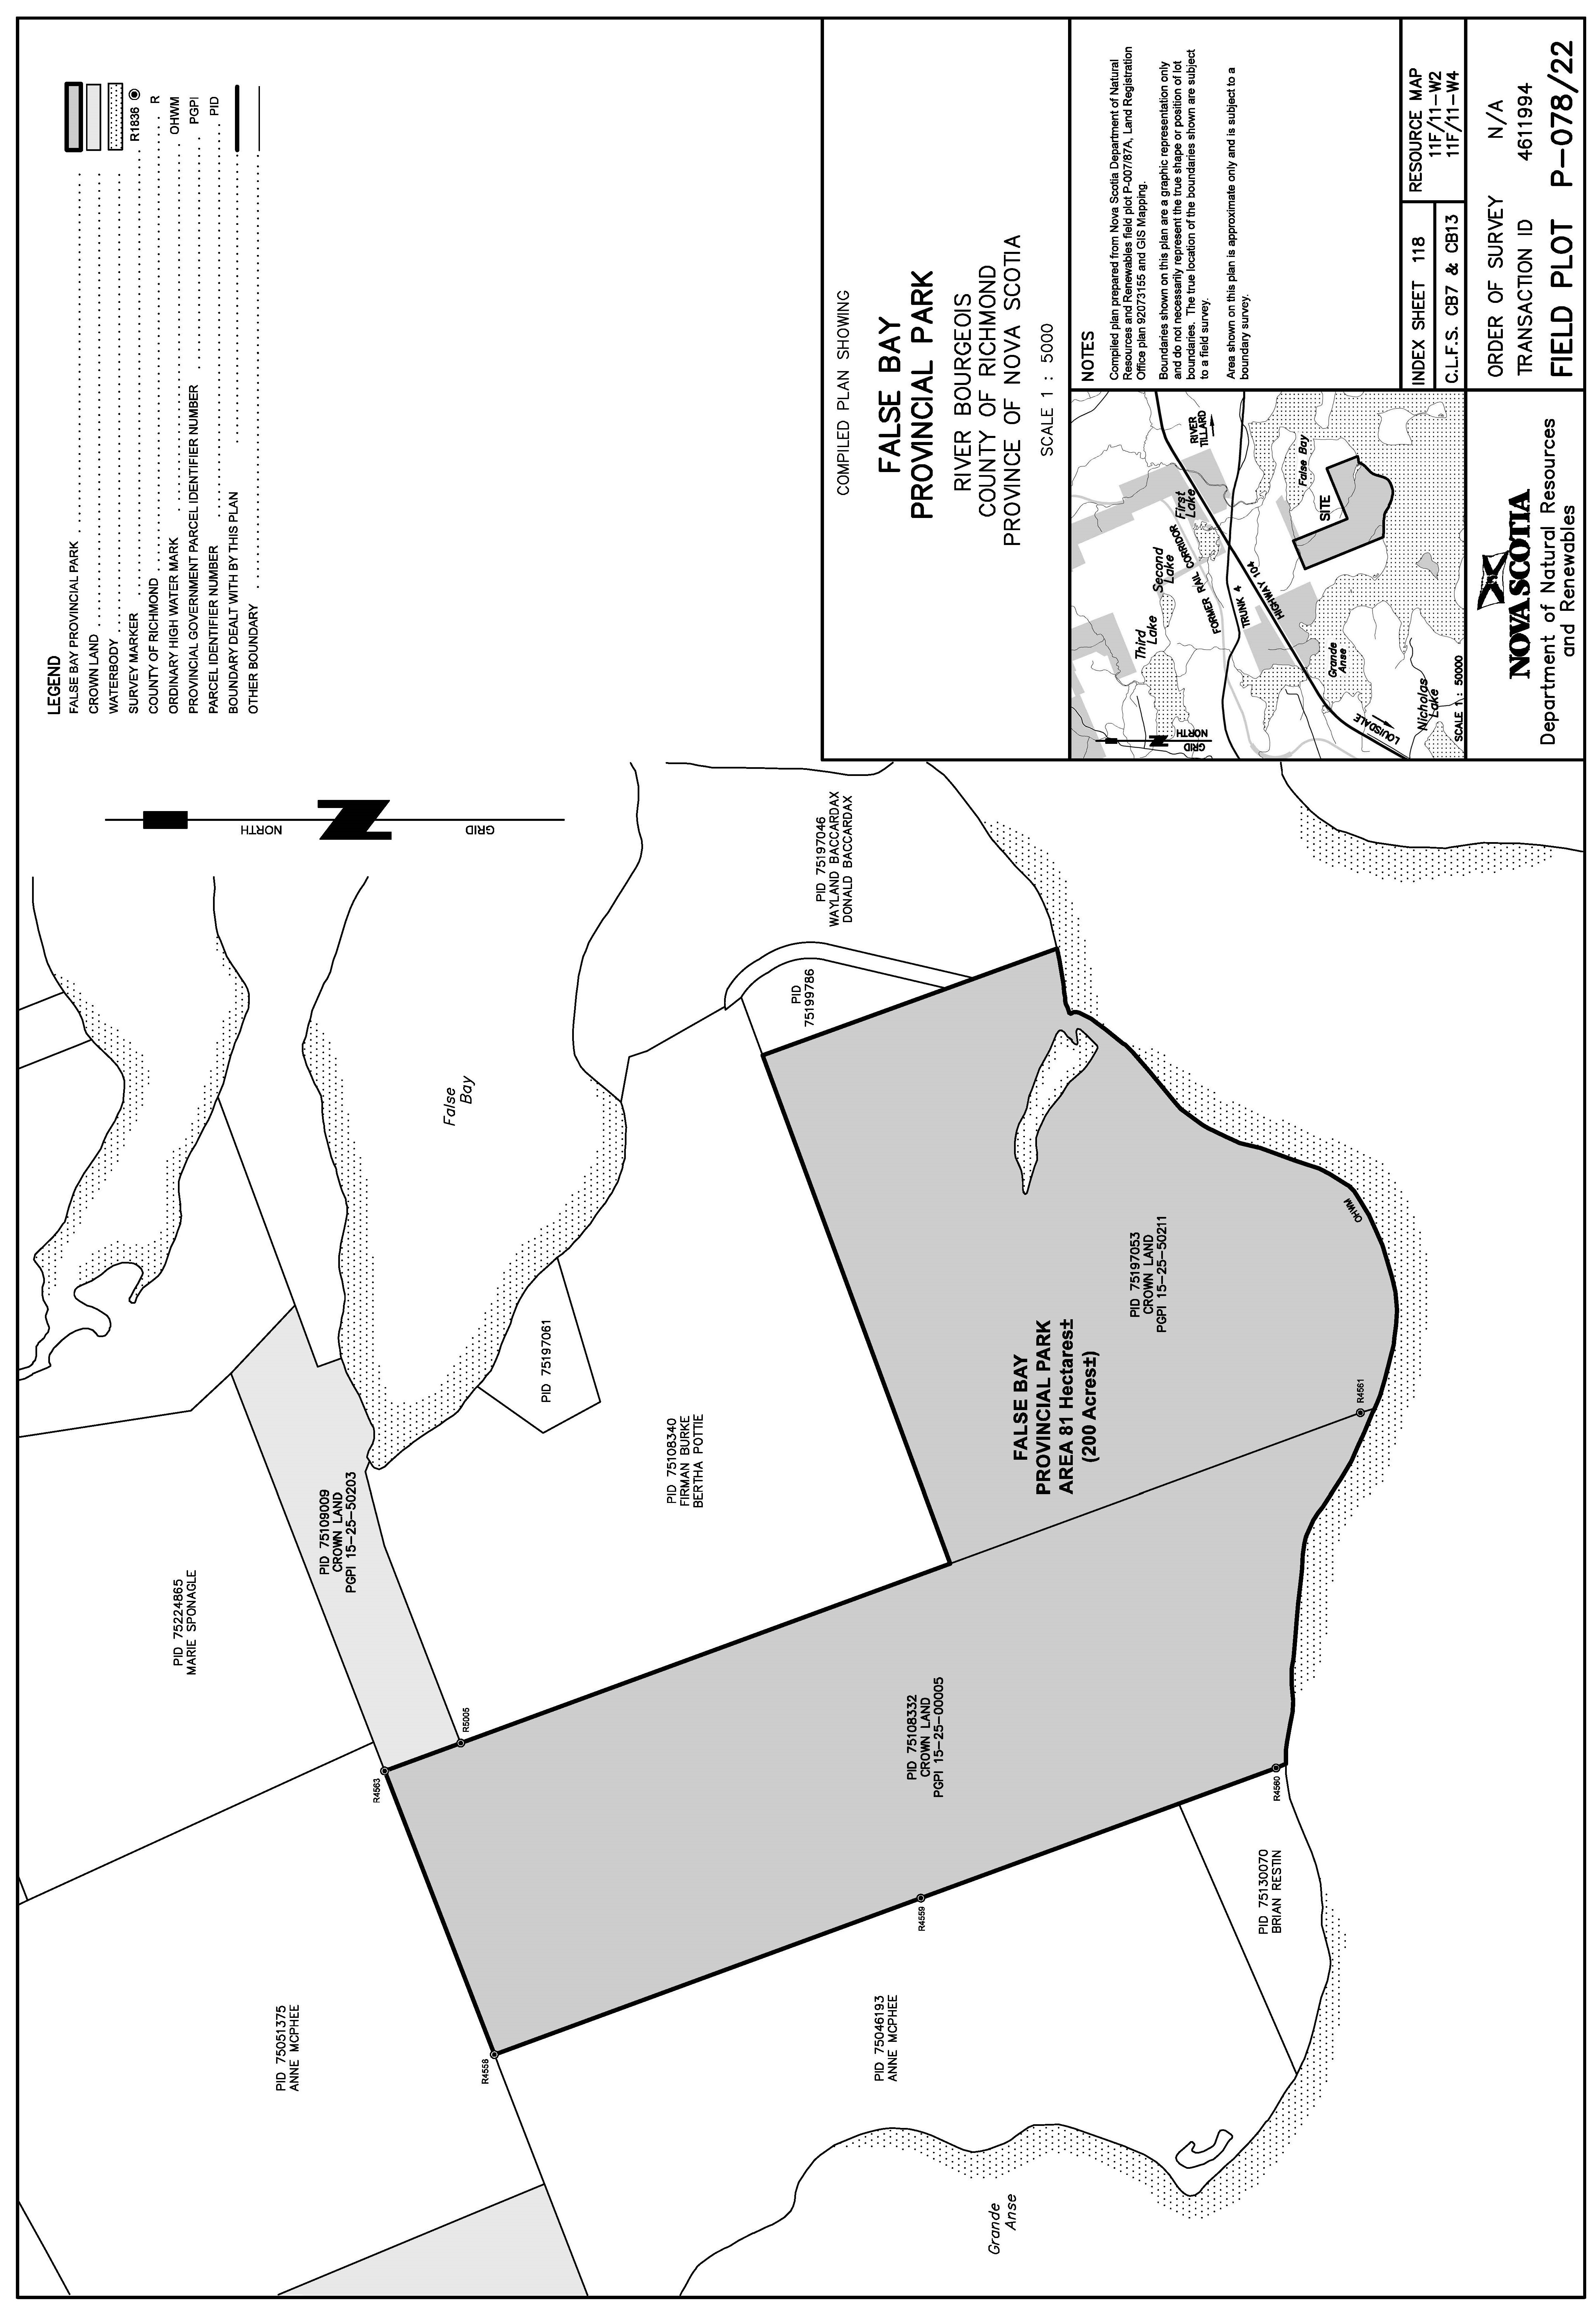 Graphic showing map of False Bay Provincial Park